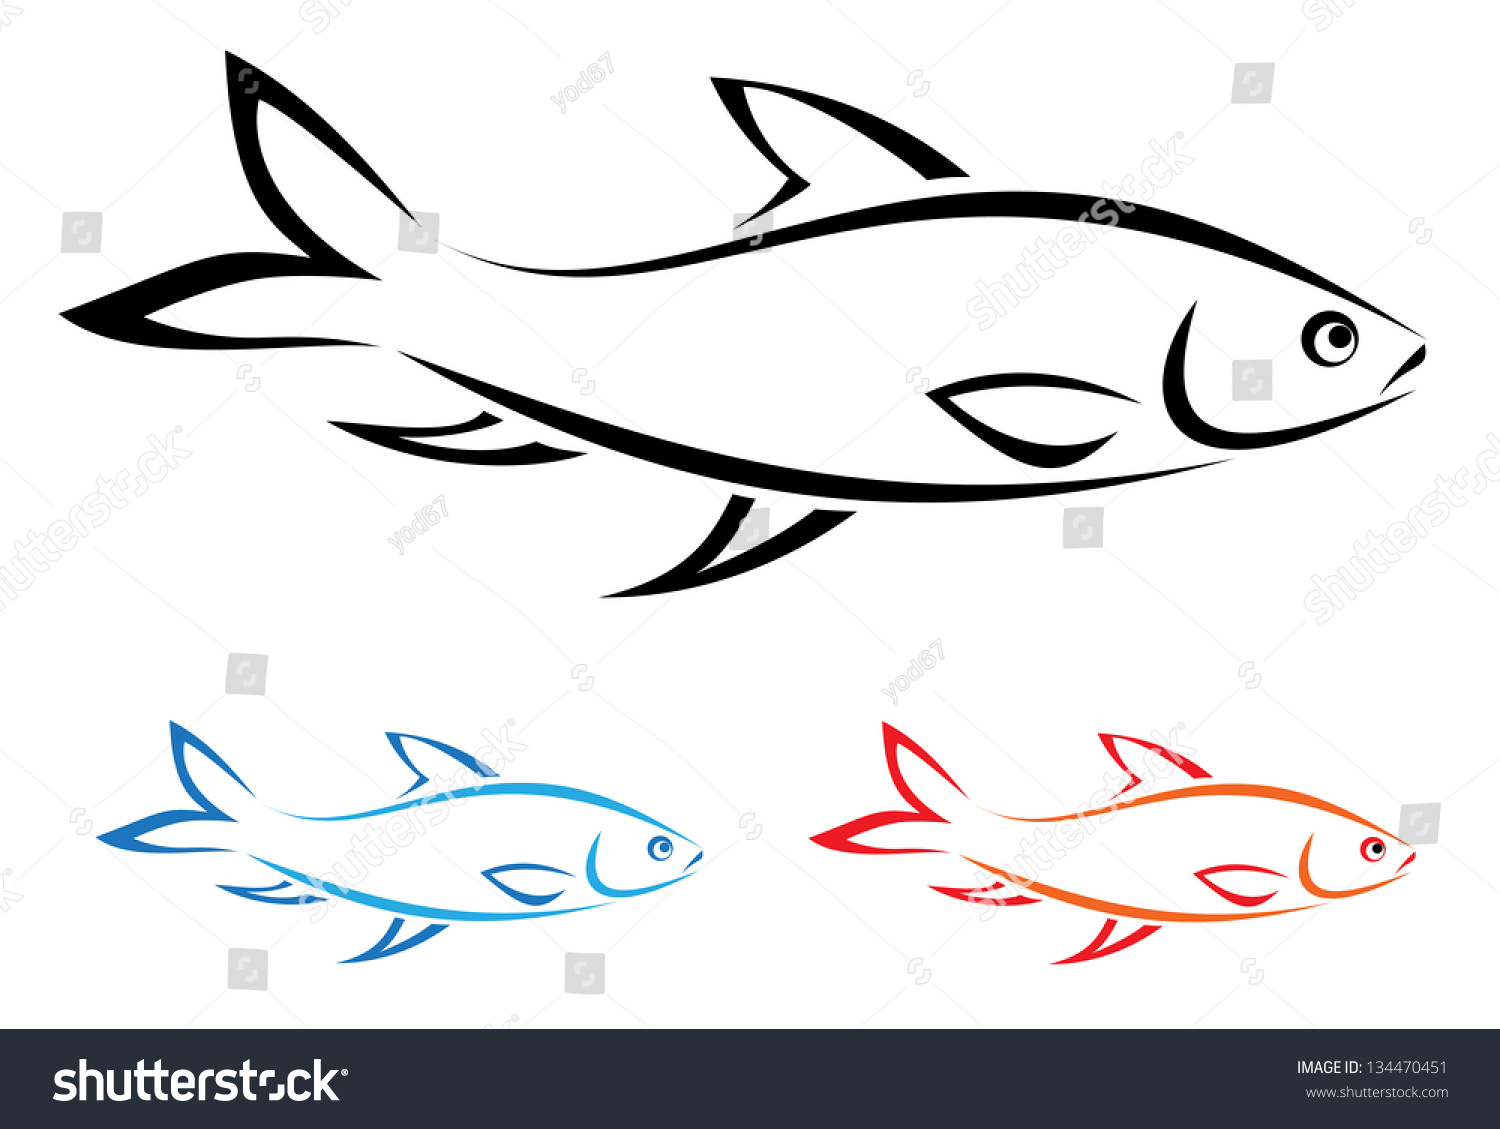 Vector Image Of An Fish On White Background - 134470451 : Shutterstock